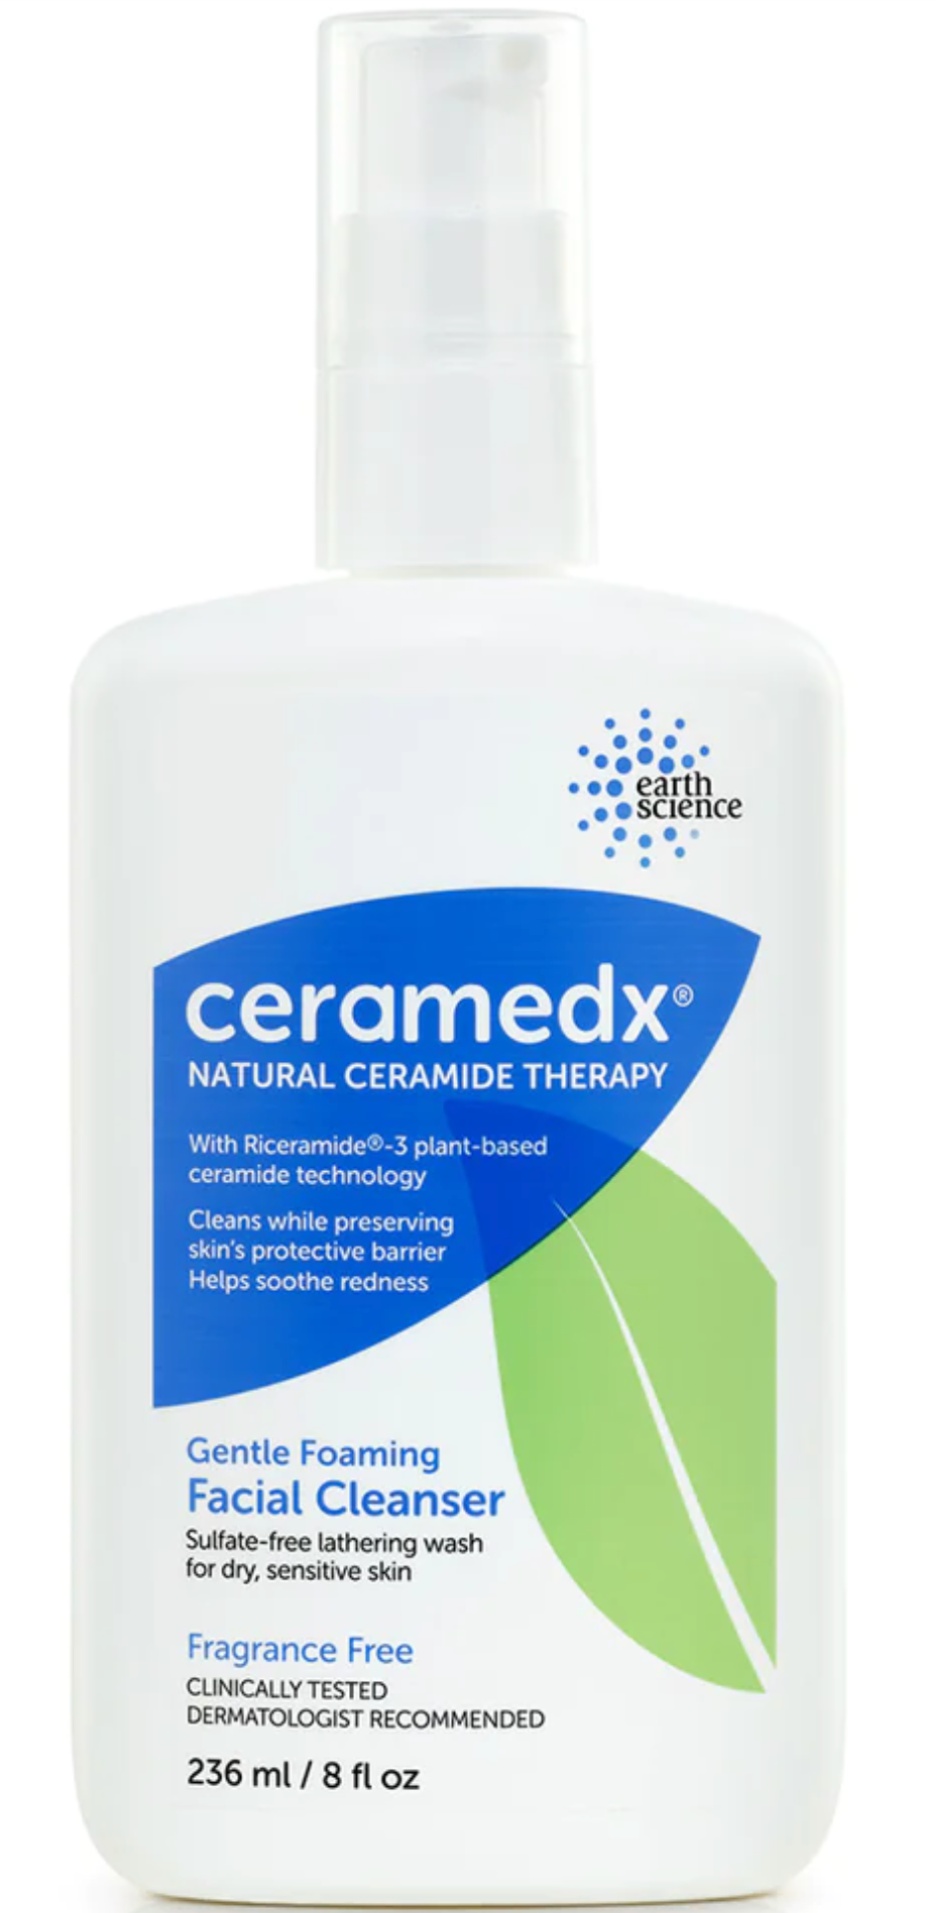 Cremadex Gentle Foaming Facial Cleanser